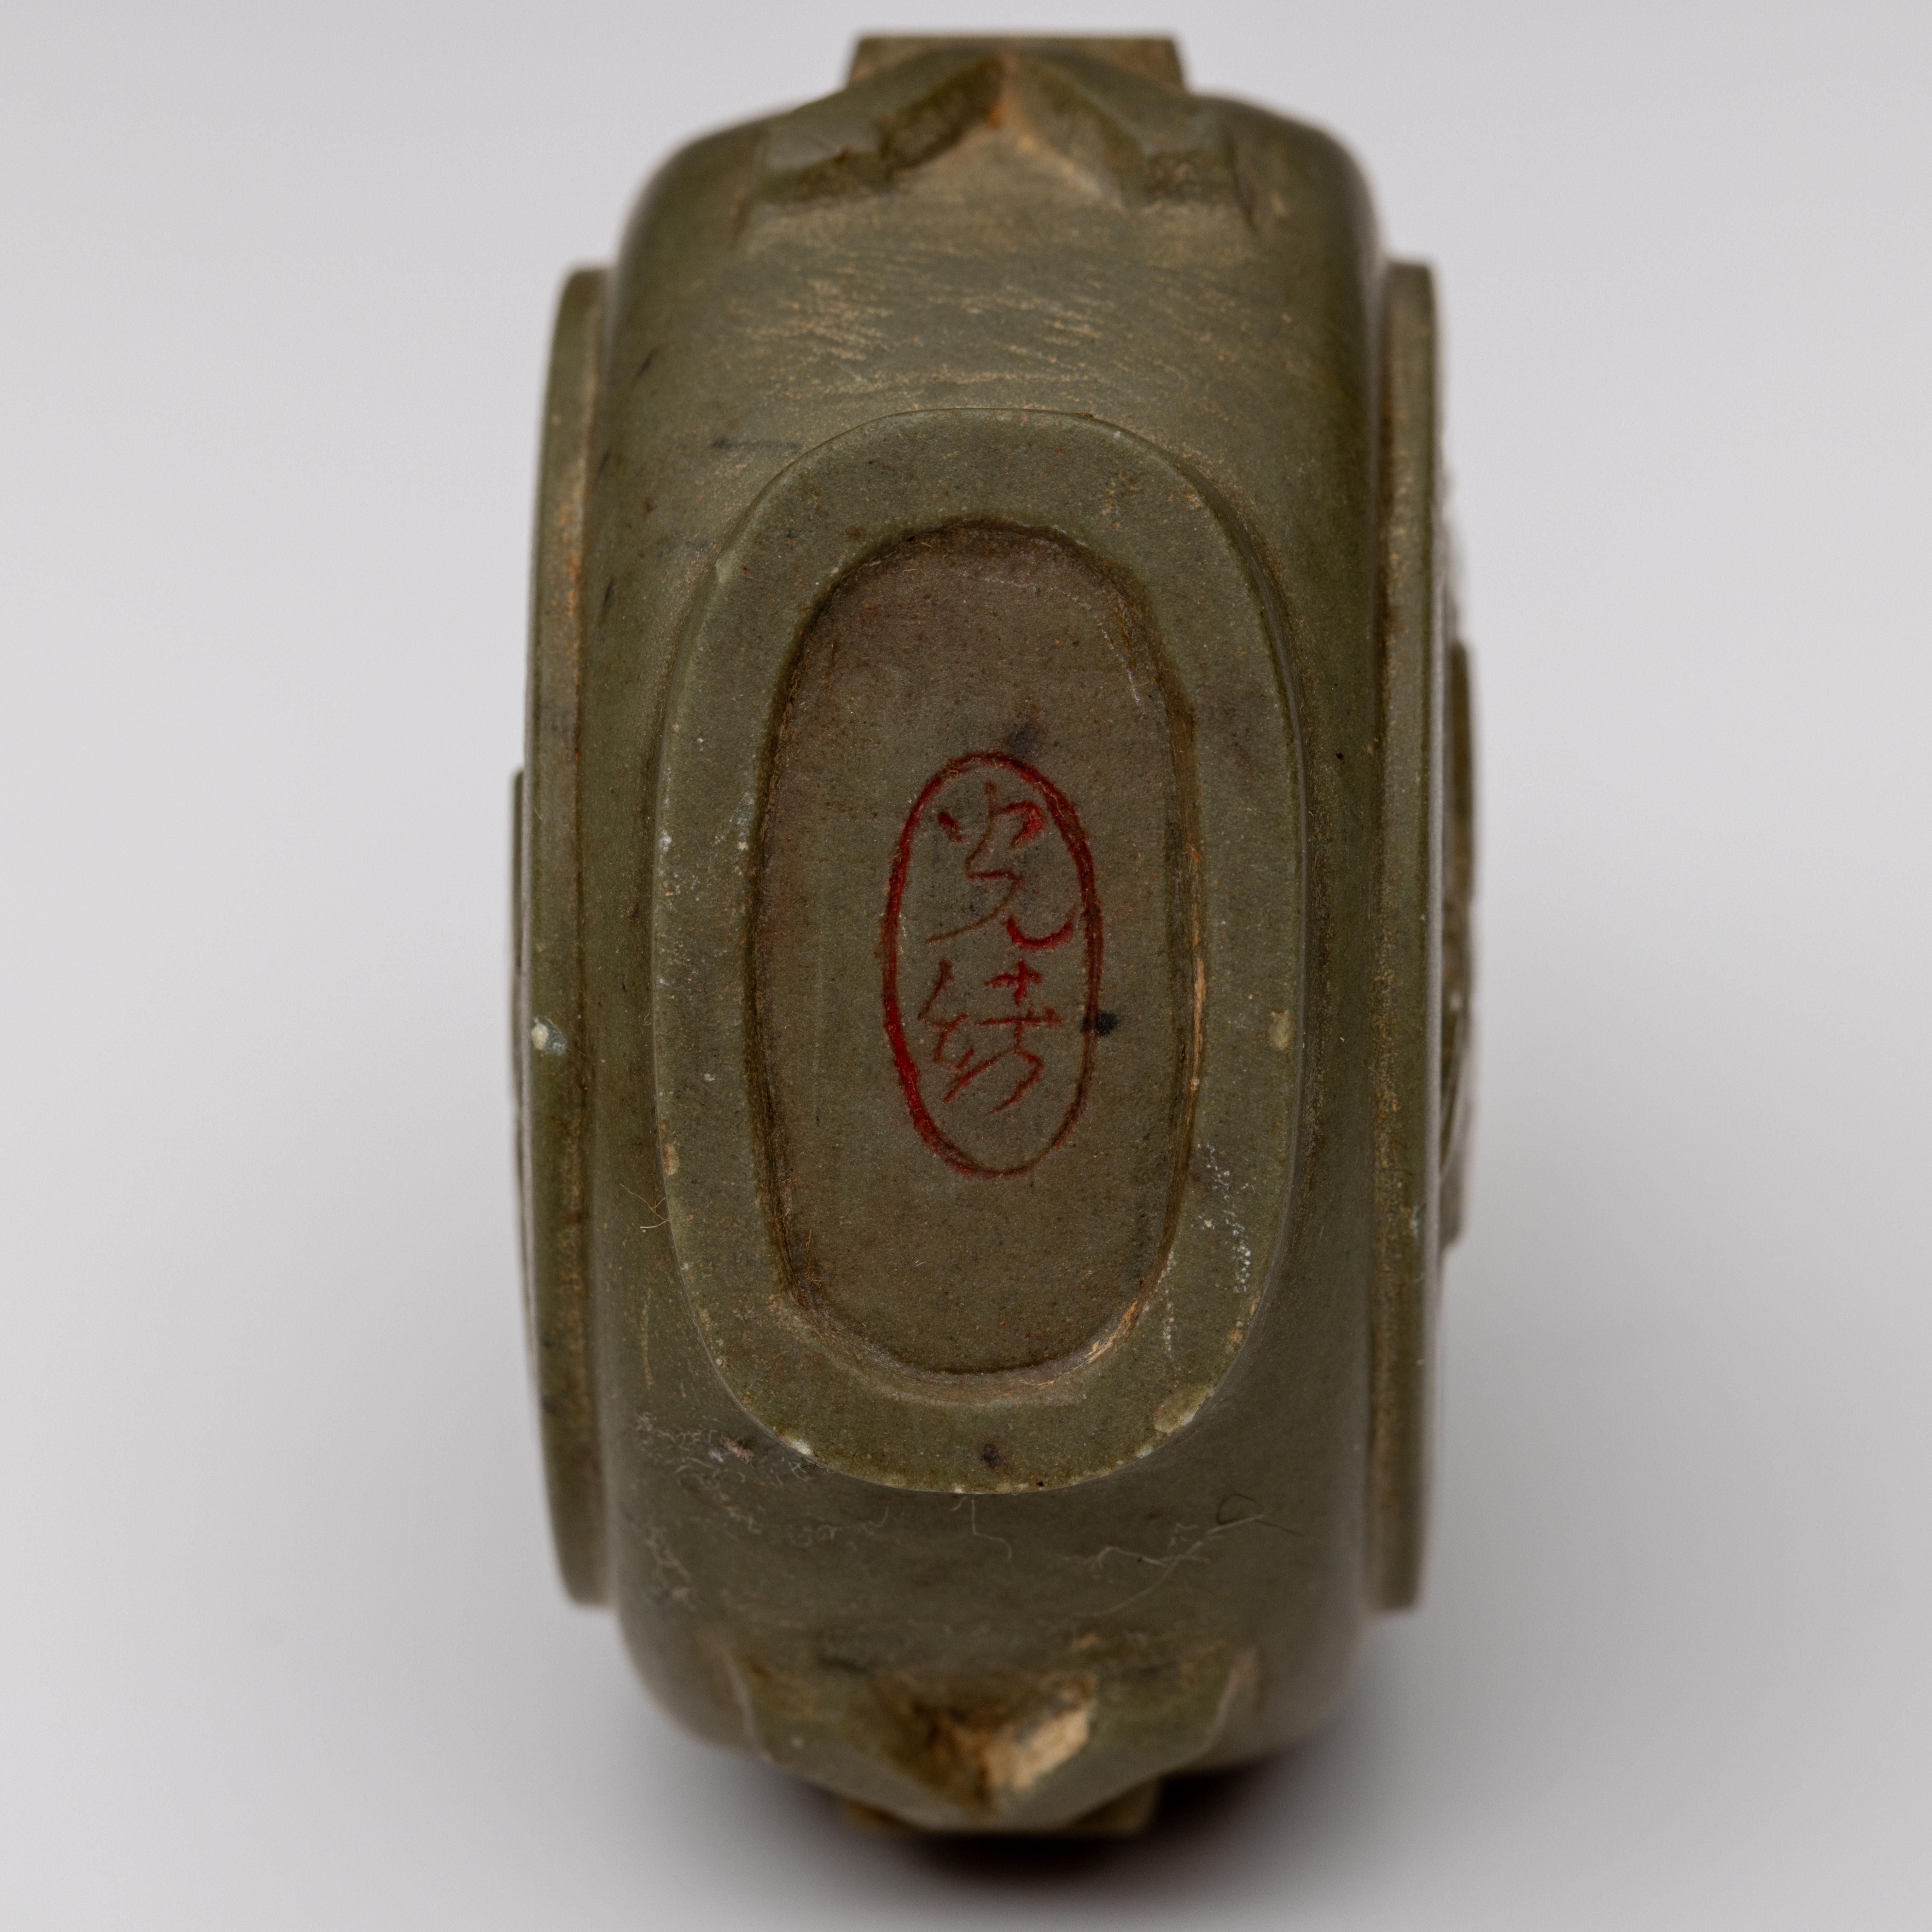 China, a zisha Yixing snuff bottle and stopper, late Qing dynasty (1644-1912) - Image 3 of 3